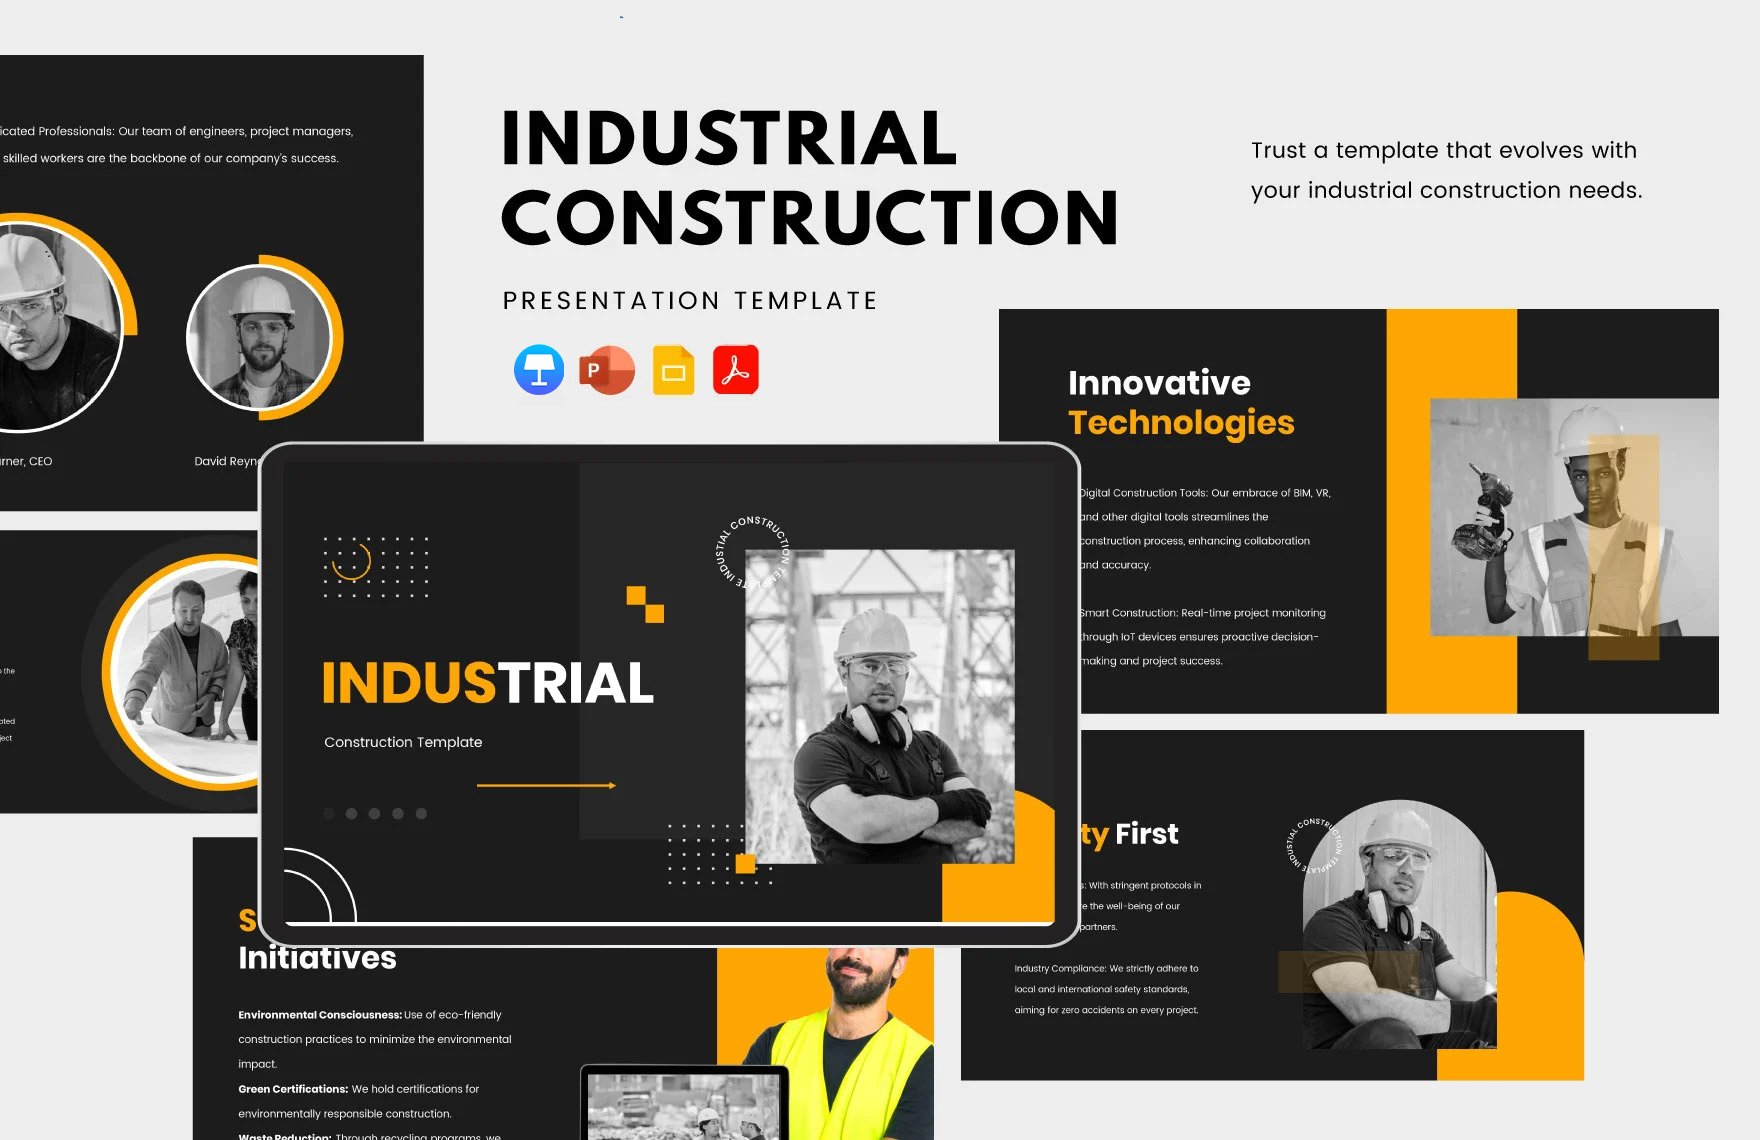 Industrial Construction Template